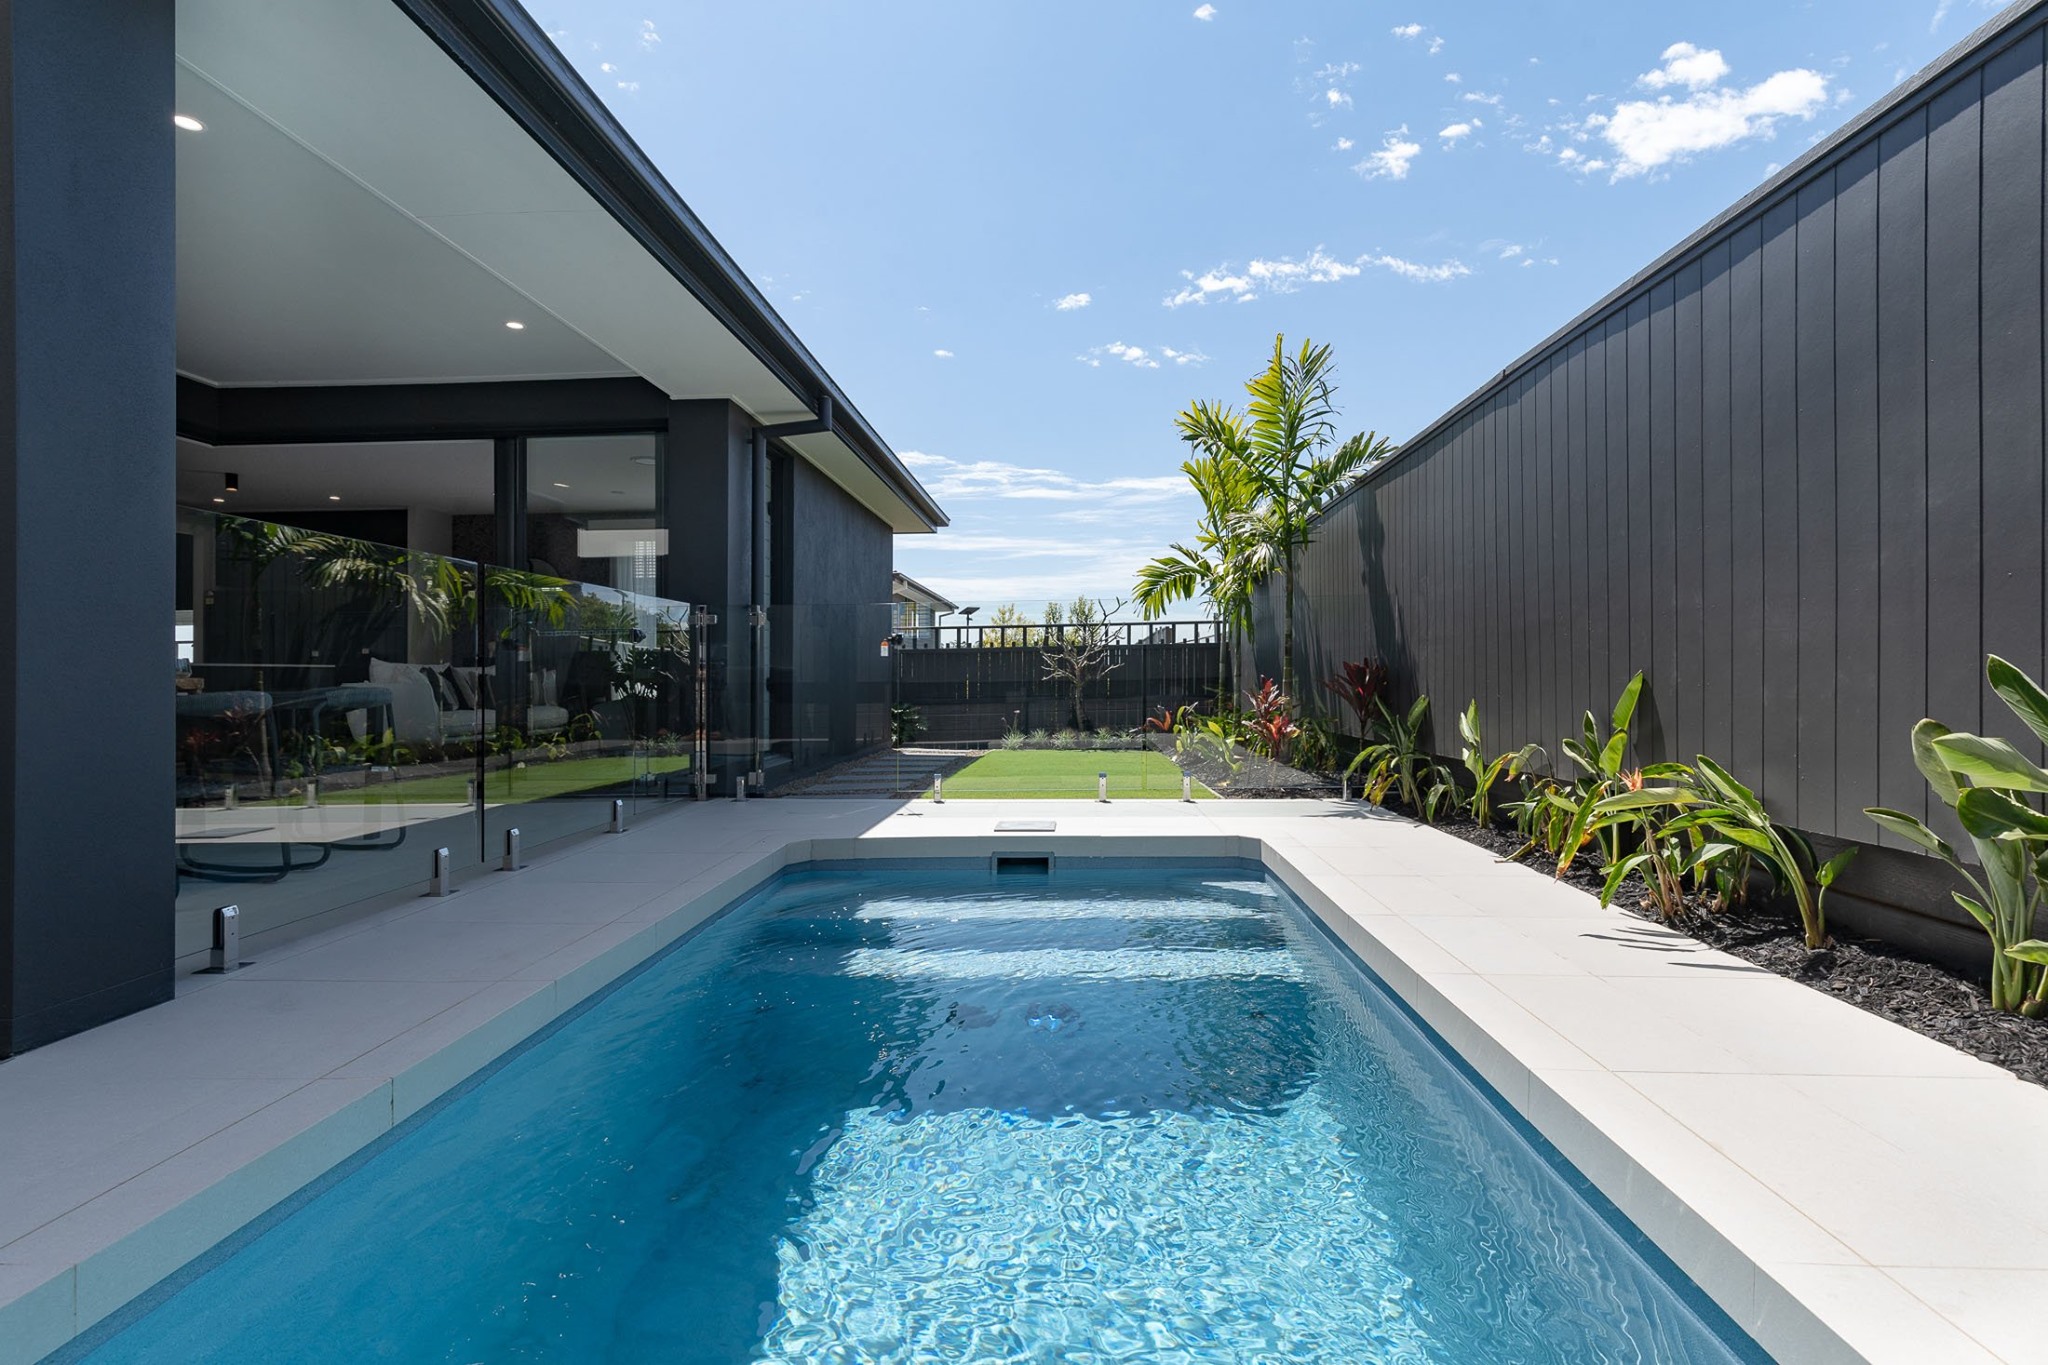 Lap Pool vs Plunge Pool – What You Need To Know